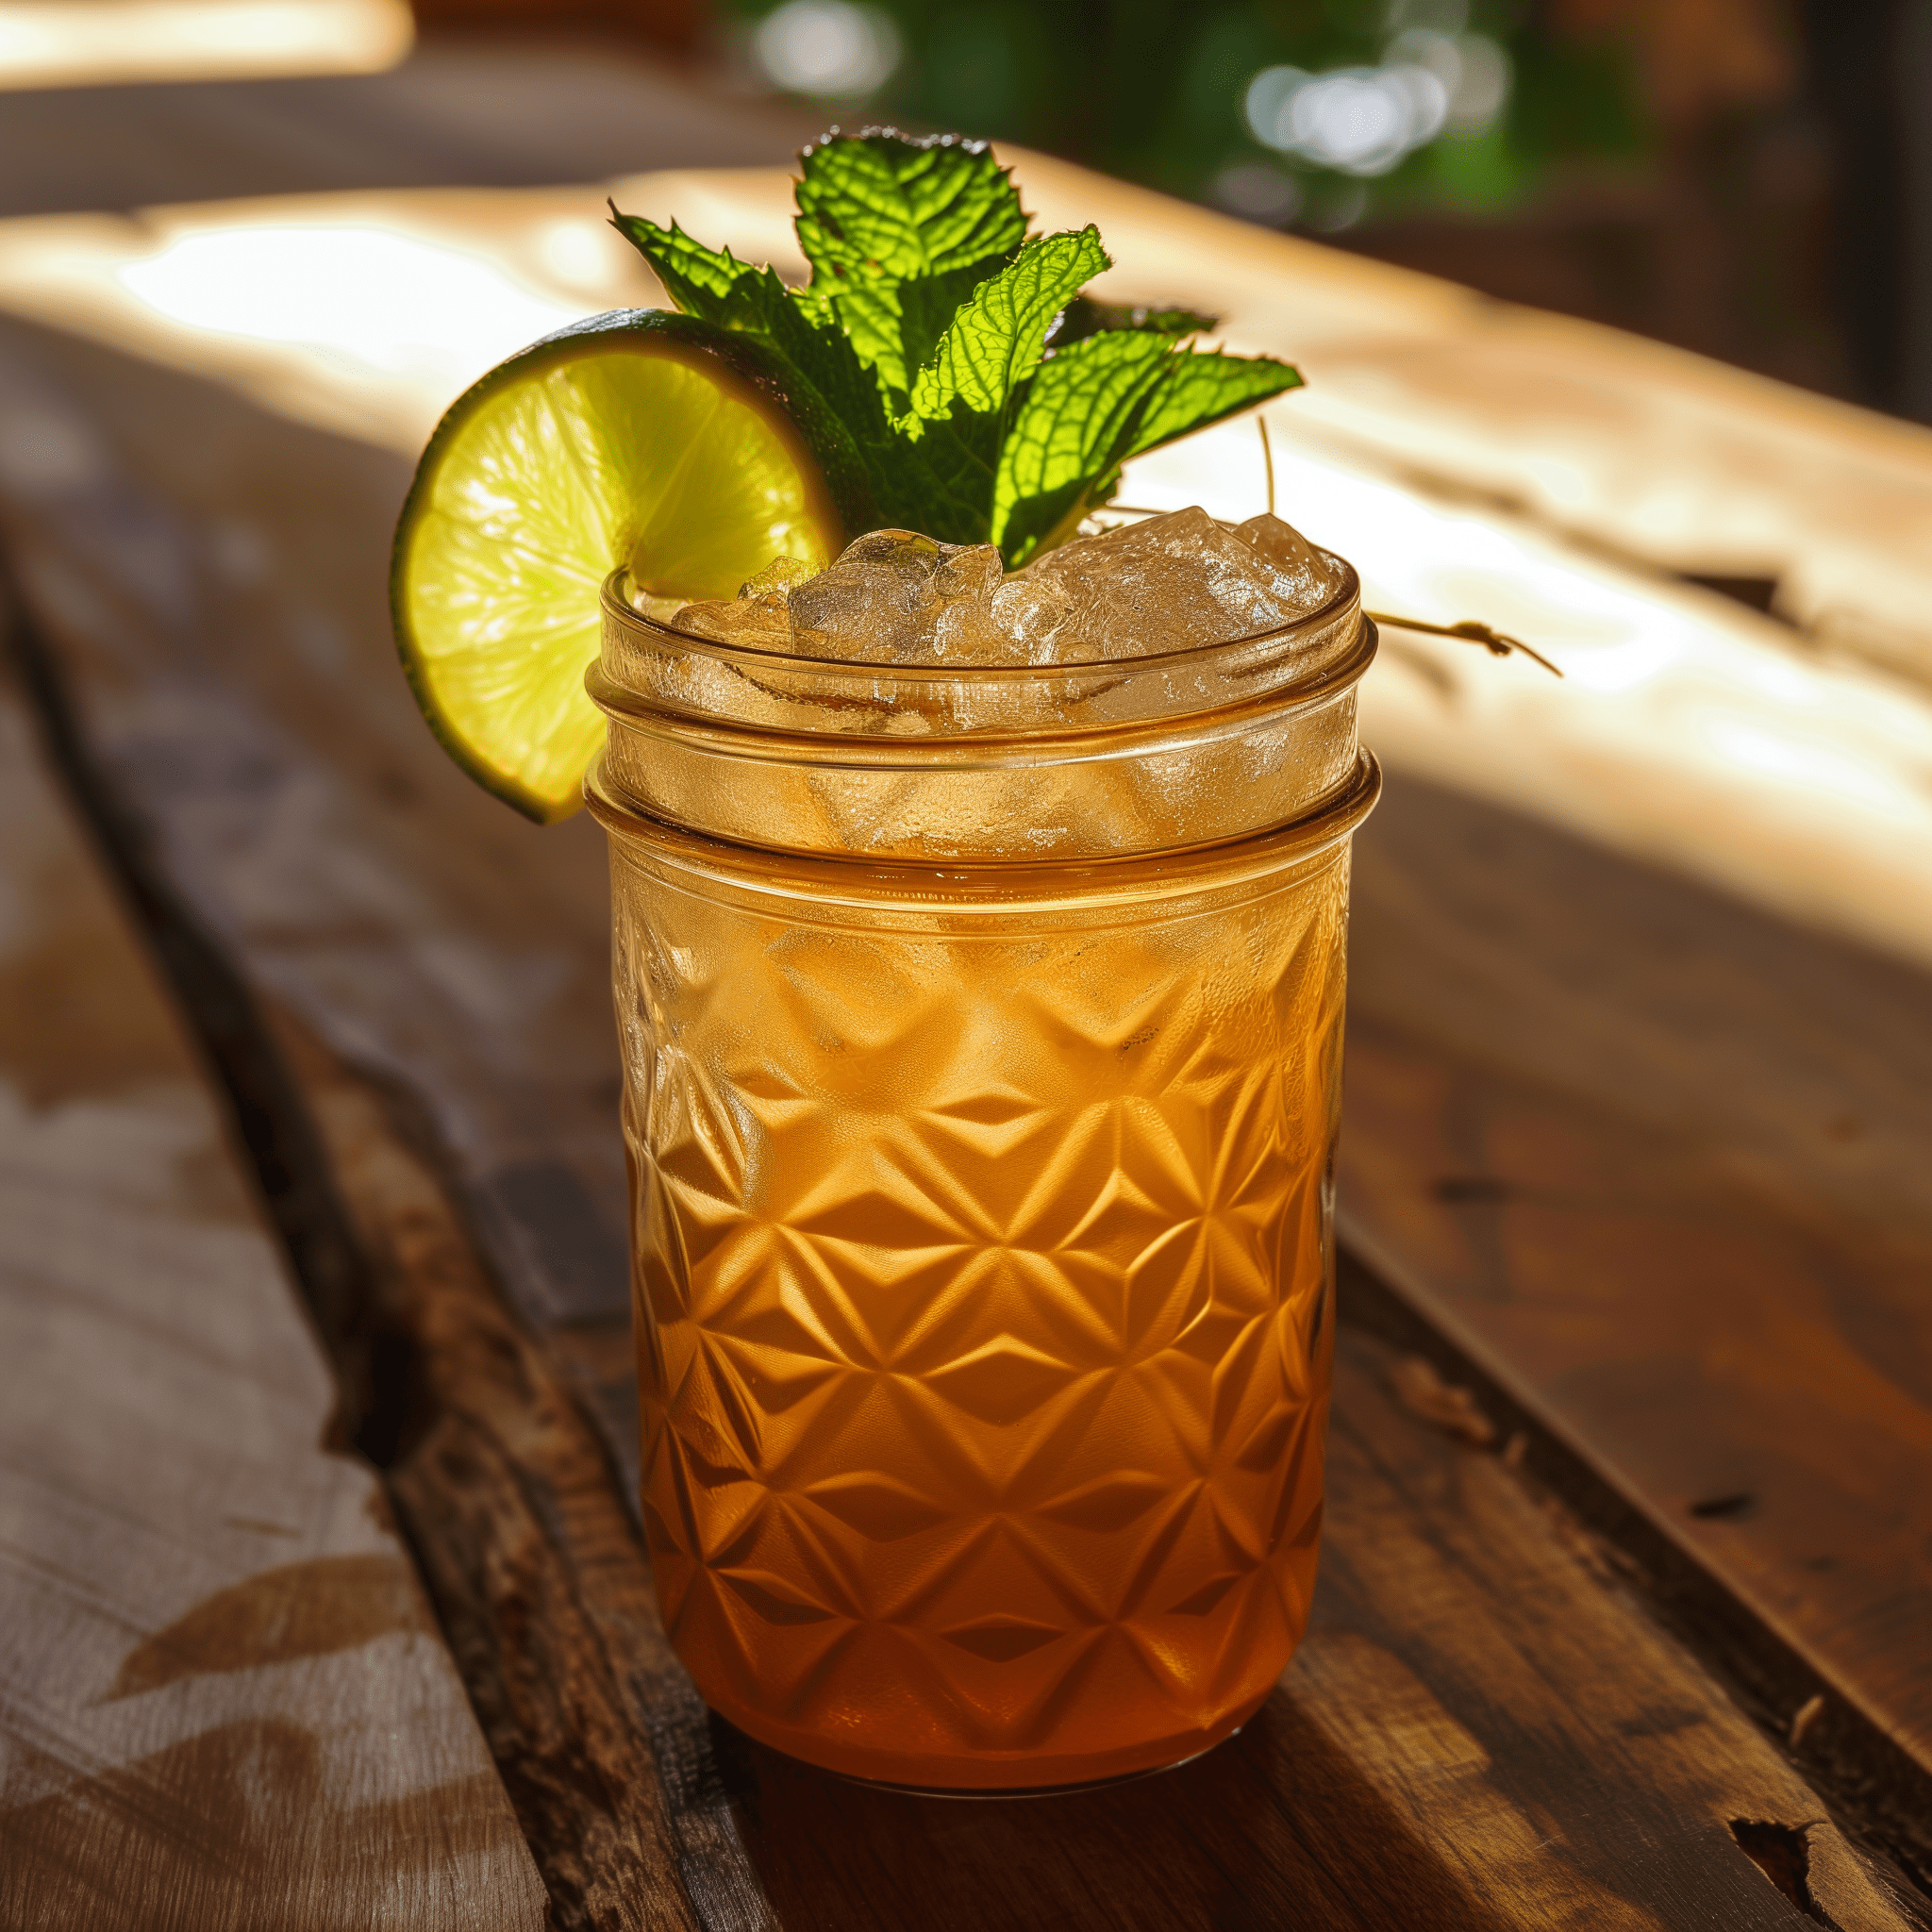 El Burro Cocktail Recipe - El Burro is a symphony of flavors where the earthy notes of tequila meet the anise-like undertones of absinthe, balanced by the tartness of lime and the sweetness of pineapple. The ginger beer adds a spicy effervescence that makes the drink invigorating and complex.